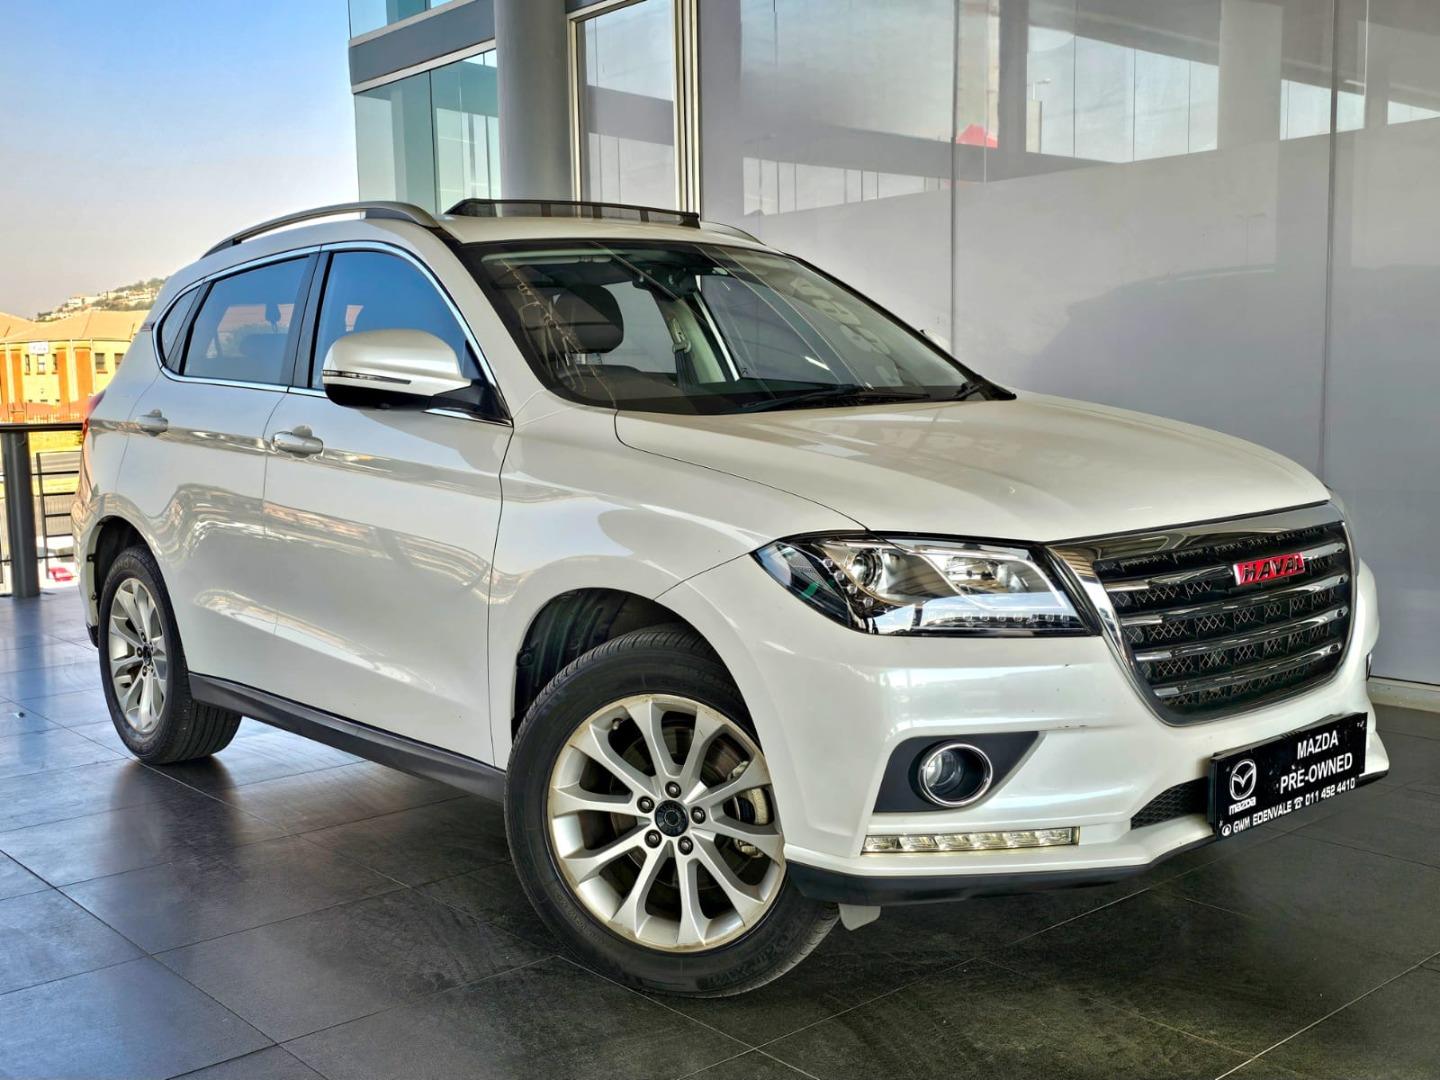 2018 Haval H2  for sale - UC4542